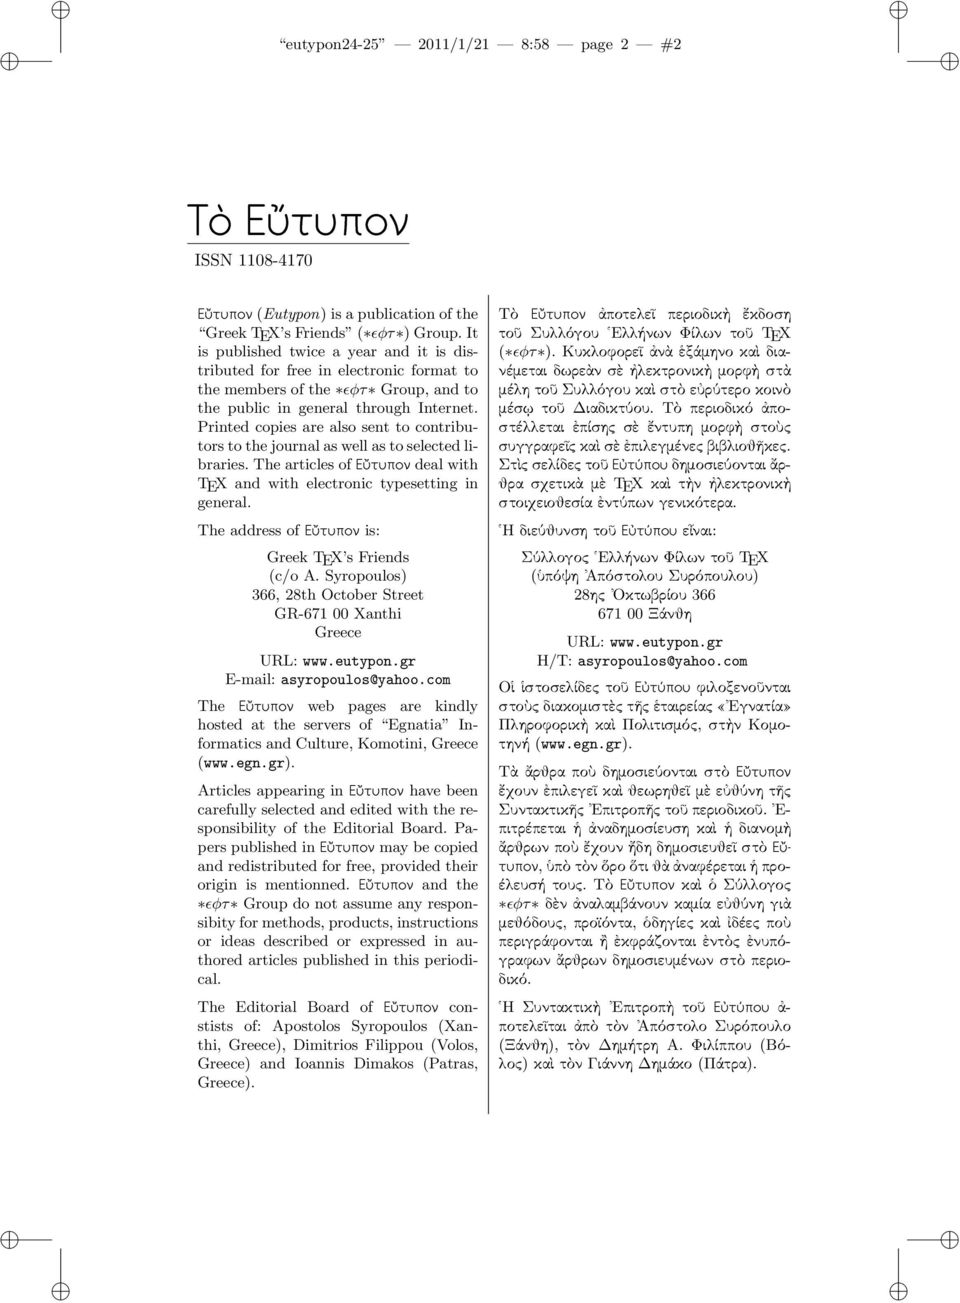 Printed copies are also sent to contributors to the journal as well as to selected libraries. The articles of EÚtupon deal with TEX and with electronic typesetting in general.